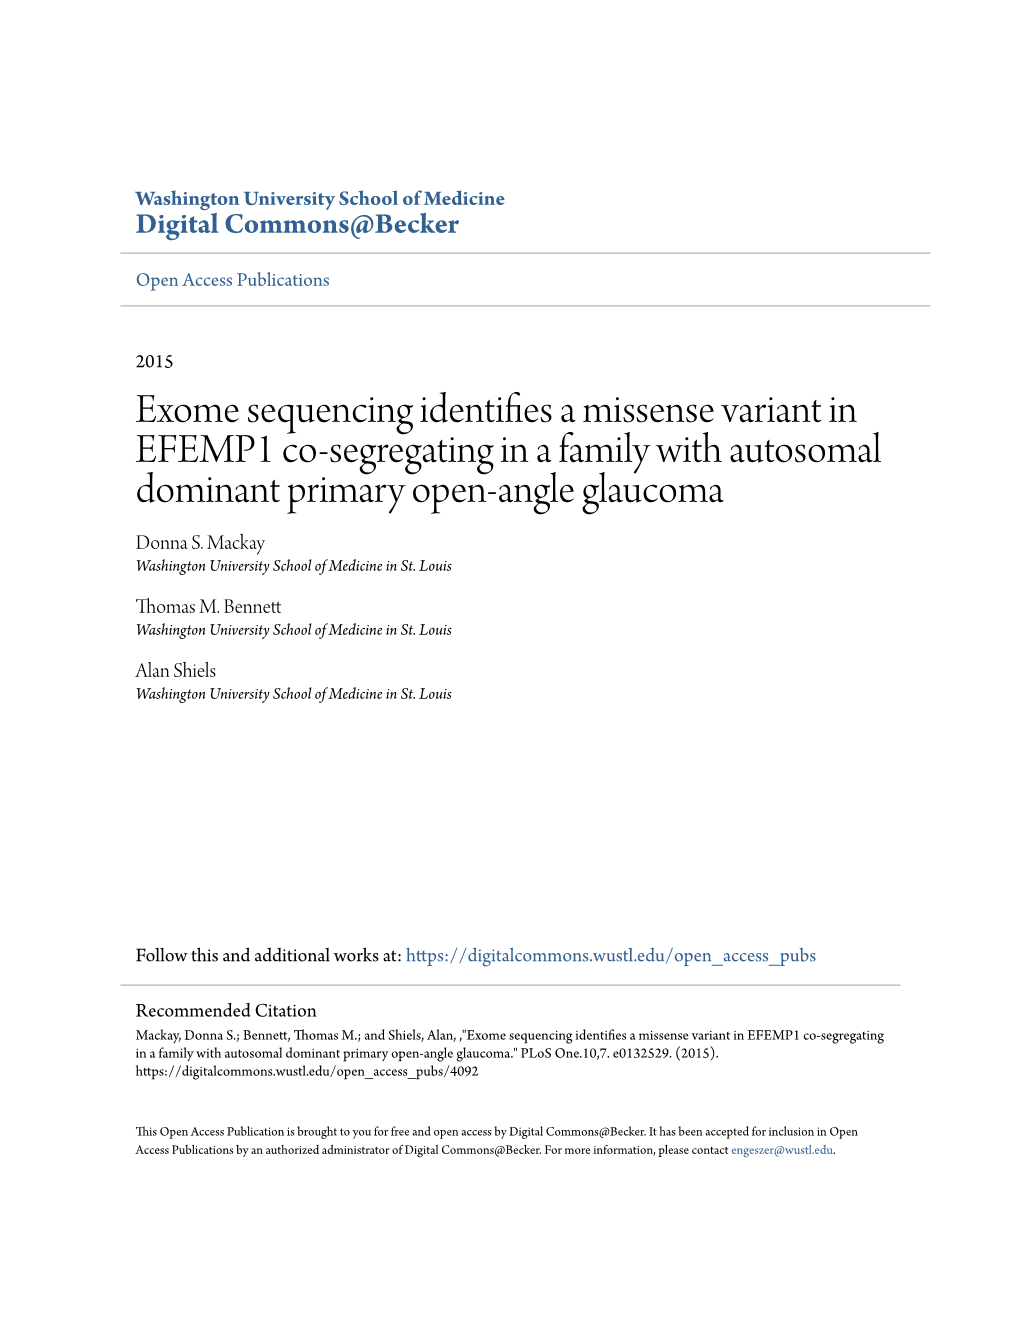 Exome Sequencing Identifies a Missense Variant in EFEMP1 Co-Segregating in a Family with Autosomal Dominant Primary Open-Angle Glaucoma Donna S